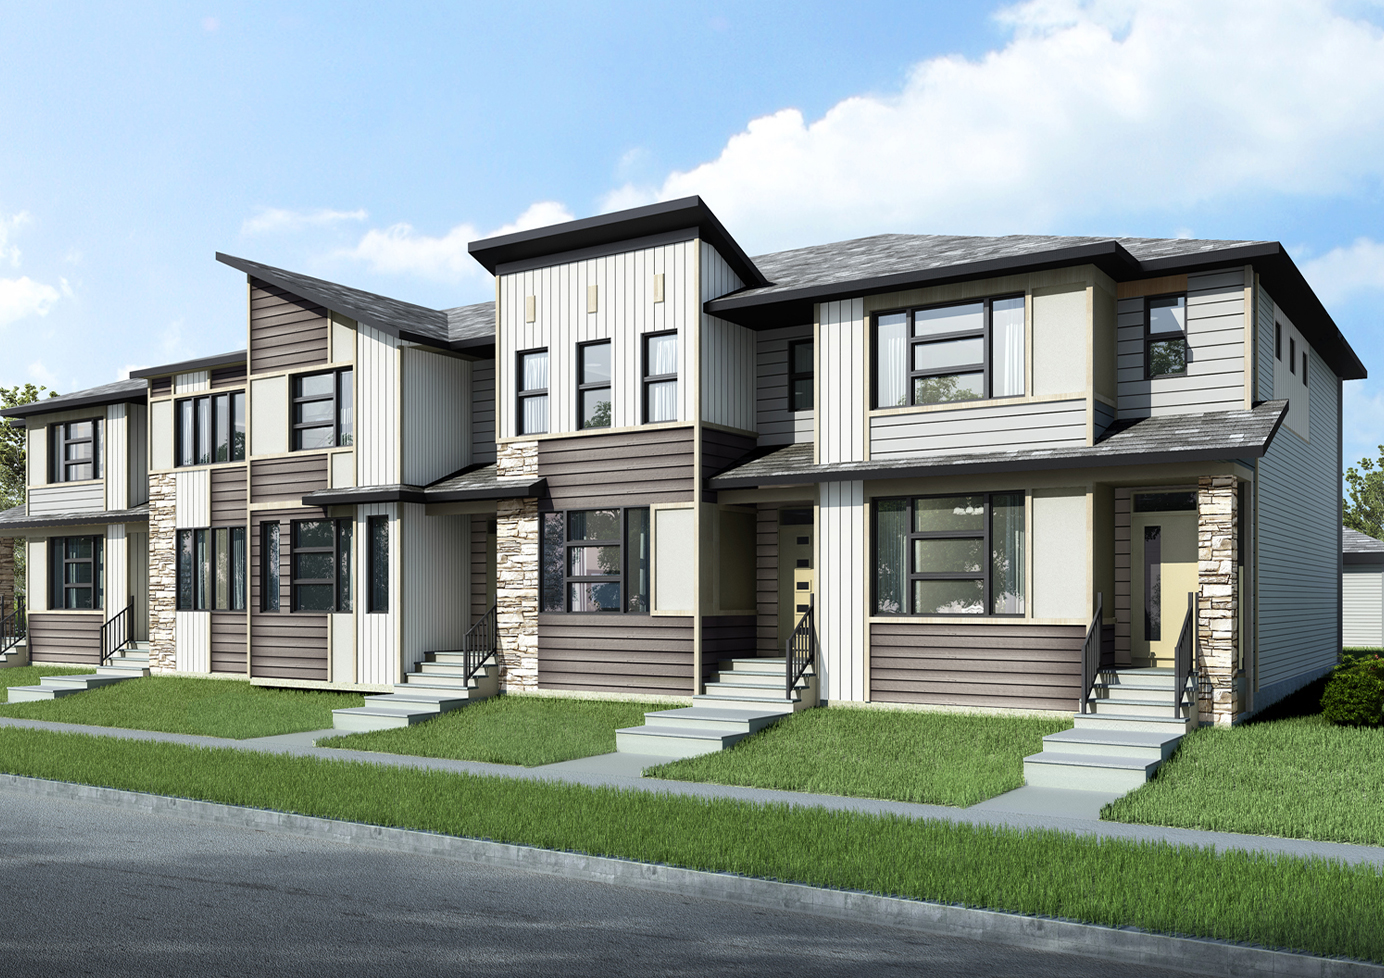 Townhome rendering in Wolf Willow